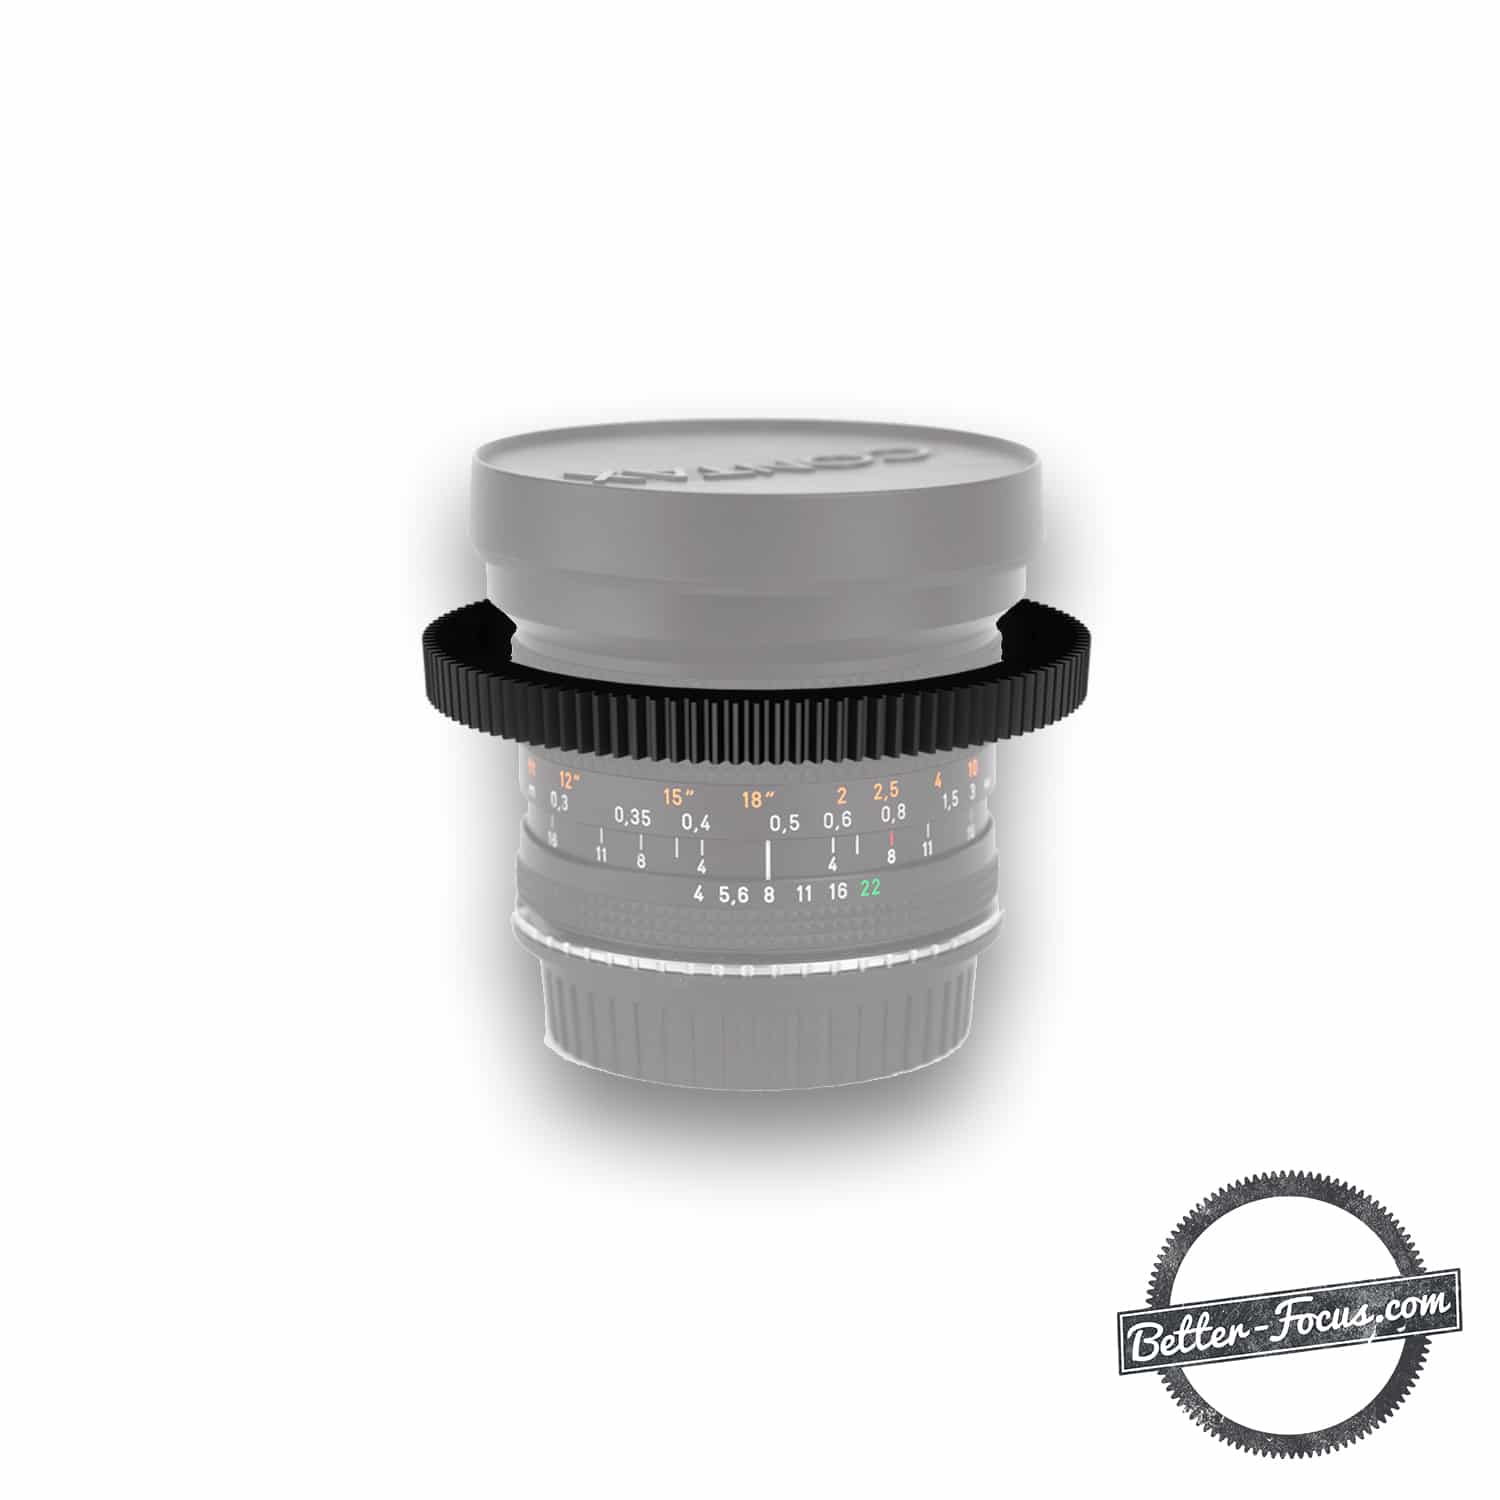 Follow Focus Gear for CONTAX ZEISS 18MM F4 DISTAGON CY  lens